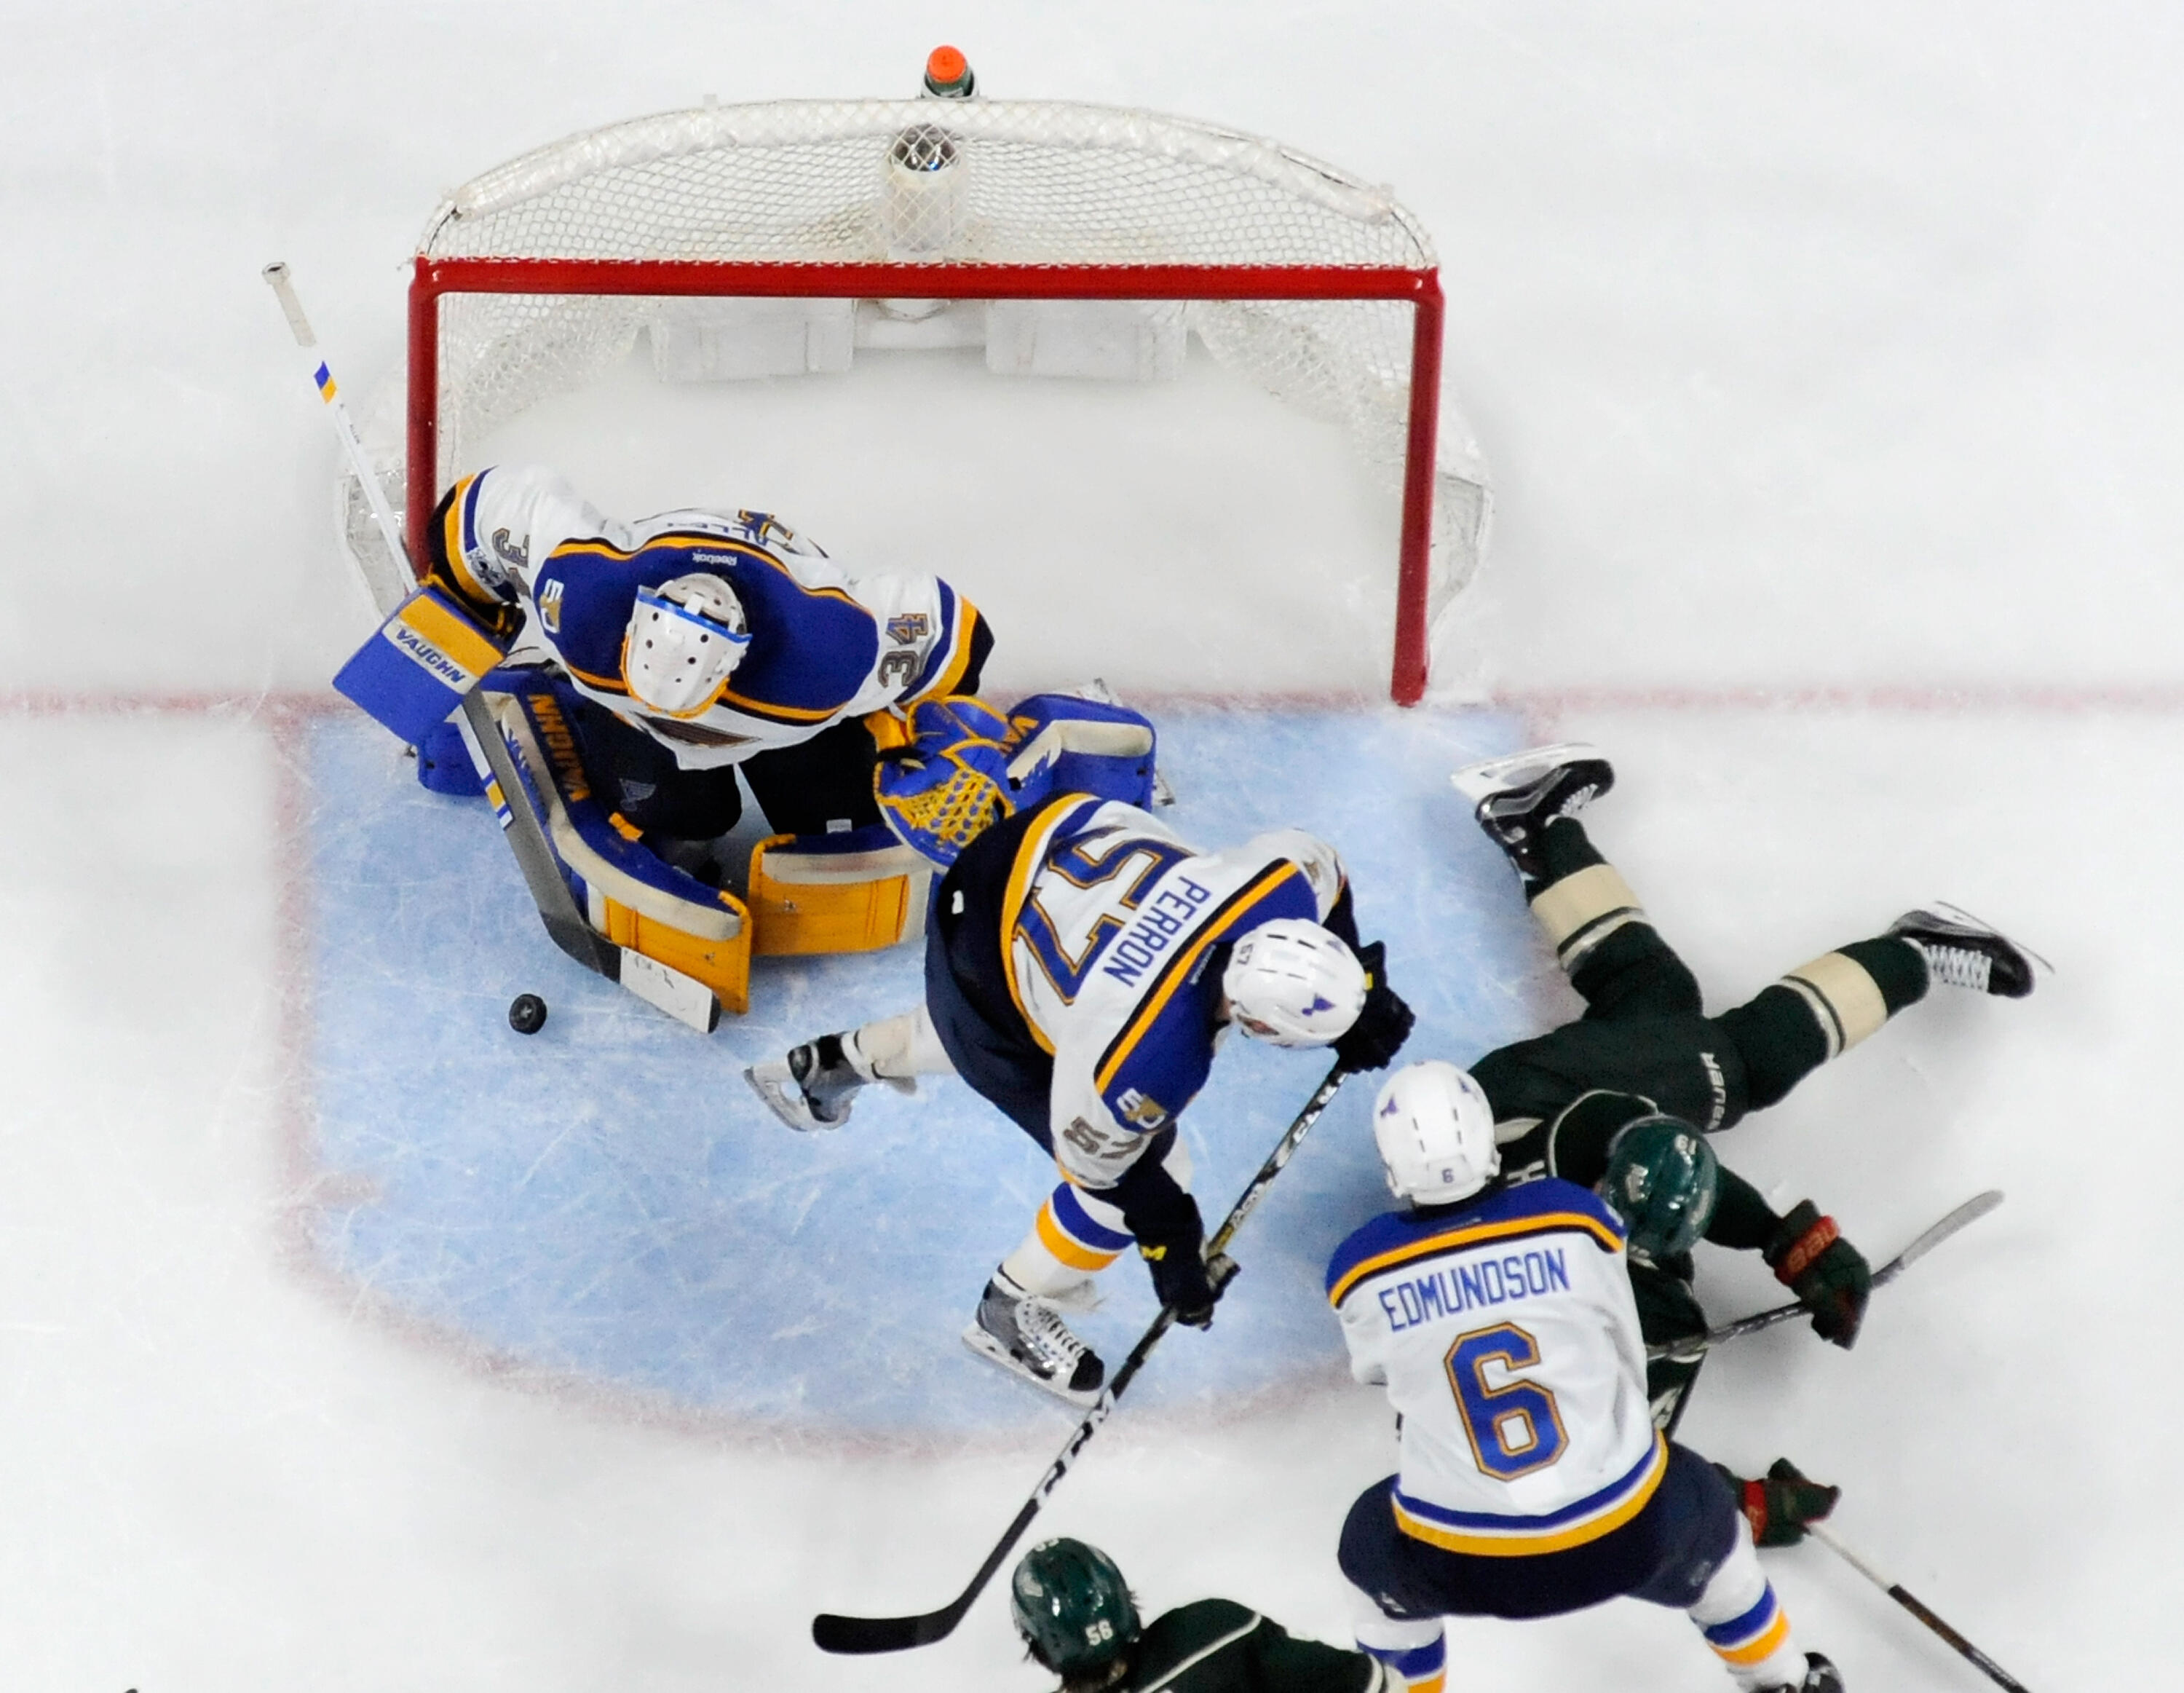 ST PAUL, MN - APRIL 14: Jake Allen #34 of the St. Louis Blues makes a stick side save of a shot by Martin Hanzal #19 of the Minnesota Wild as teammate David Perron #57 and Joel Edmundson #6 look on during the third period in Game Two of the Western Confer